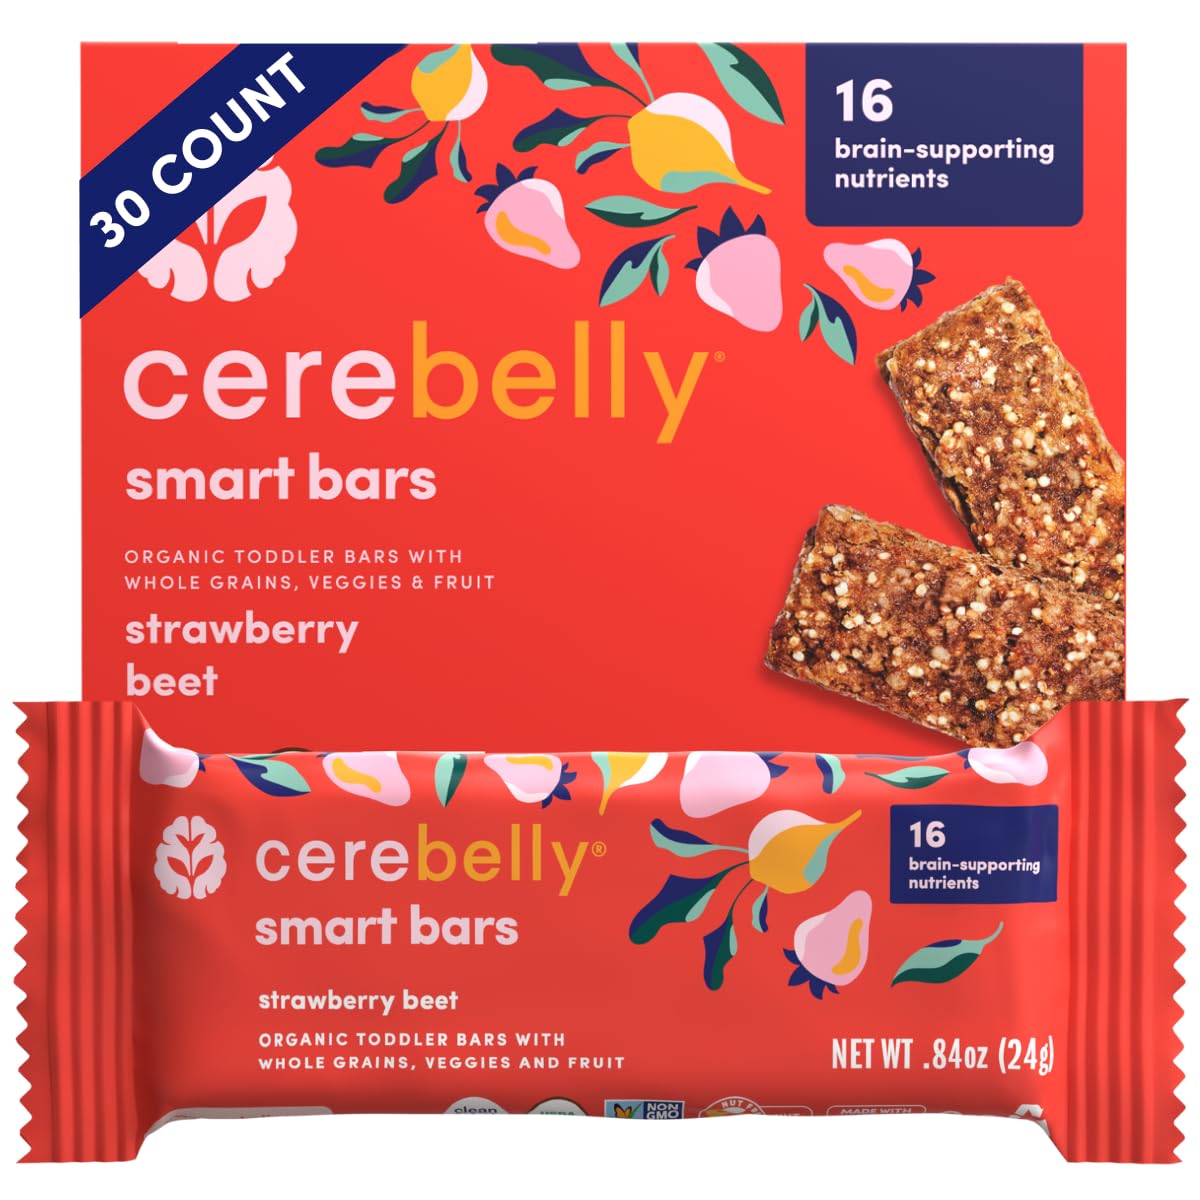 Cerebelly Organic Toddler Snack Bars – Strawberry Beet (Pack of 30), Healthy Bars with Veggies & Fruit, 16 Brain Supporting Nutrients, Nut-Free, Made with Gluten-Free Ingredients, No Added Sugar